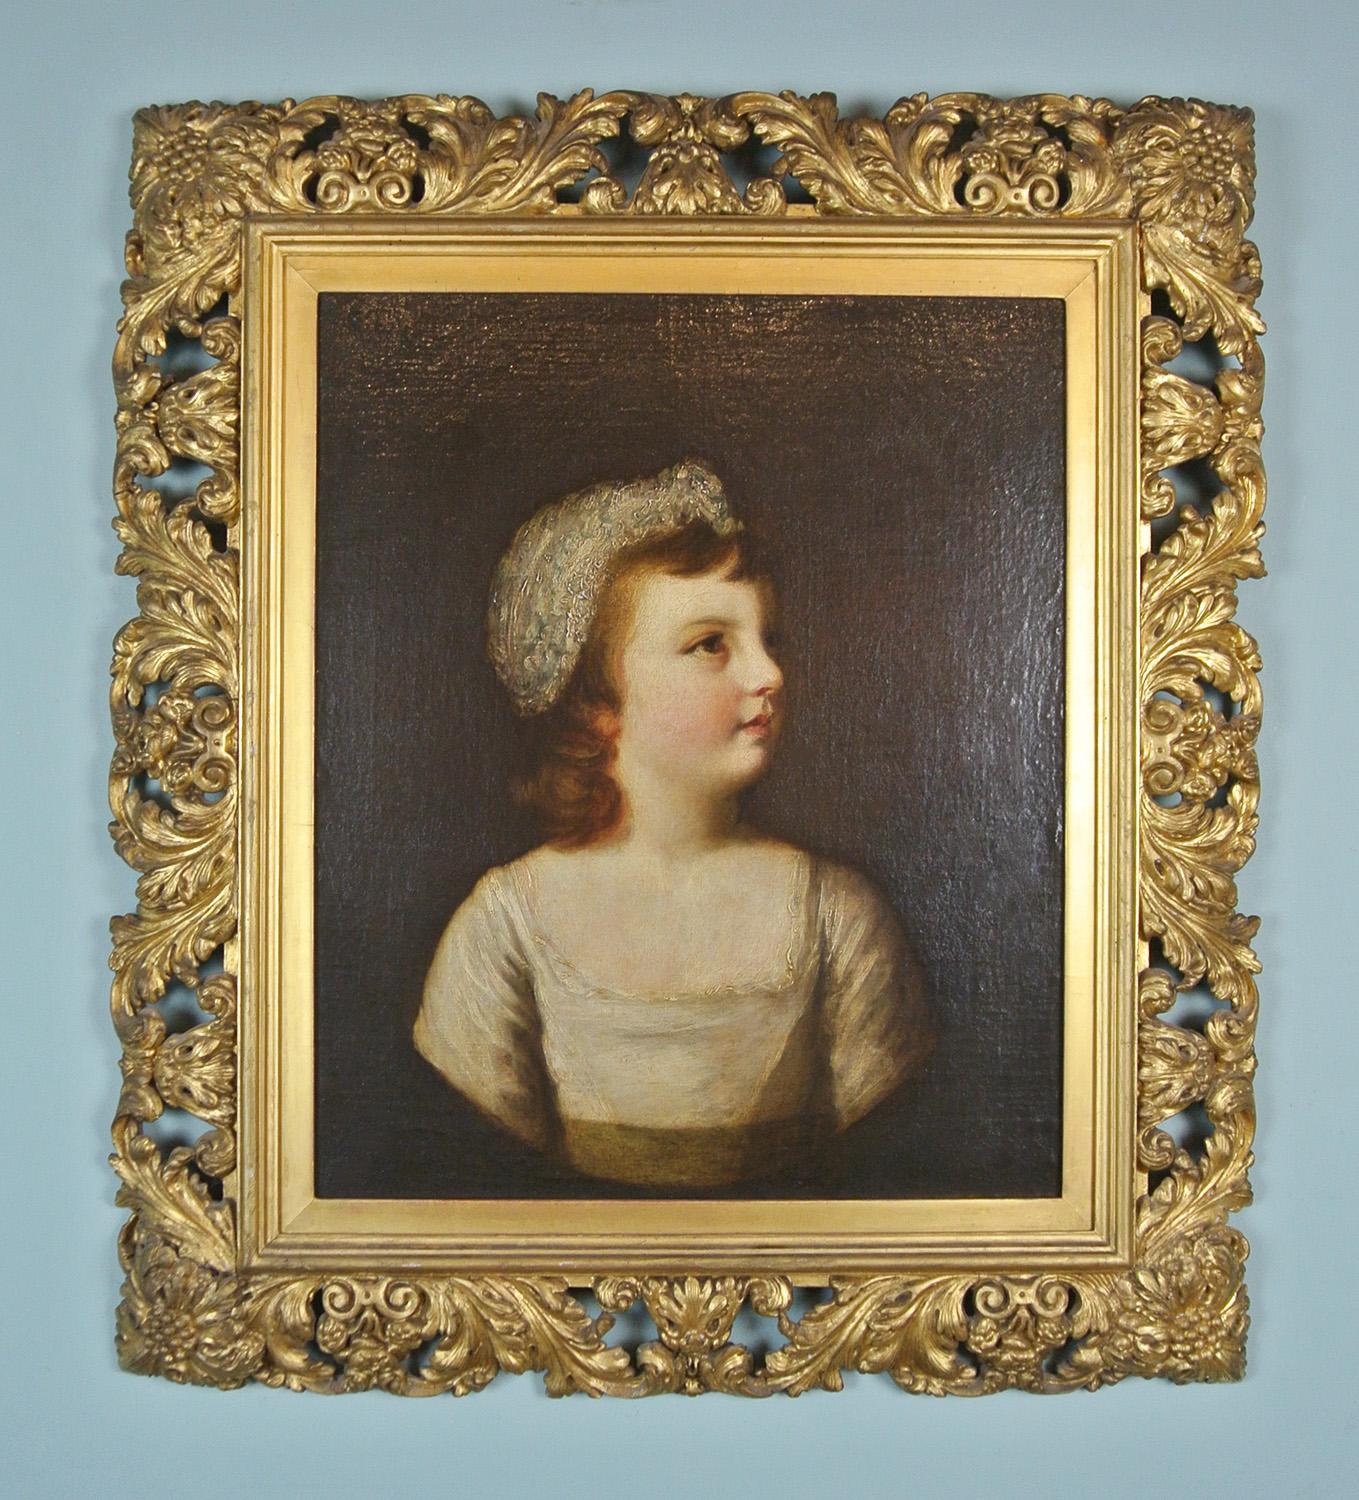 Sir Joshua Reynolds painted Lady Forrester - nee Lady Catherine Mary Manners, Daughter of the Duchess of Rutland - on at least four occasions as a child and in later life.

Her face is painted particularly delicately.

The picture set within its